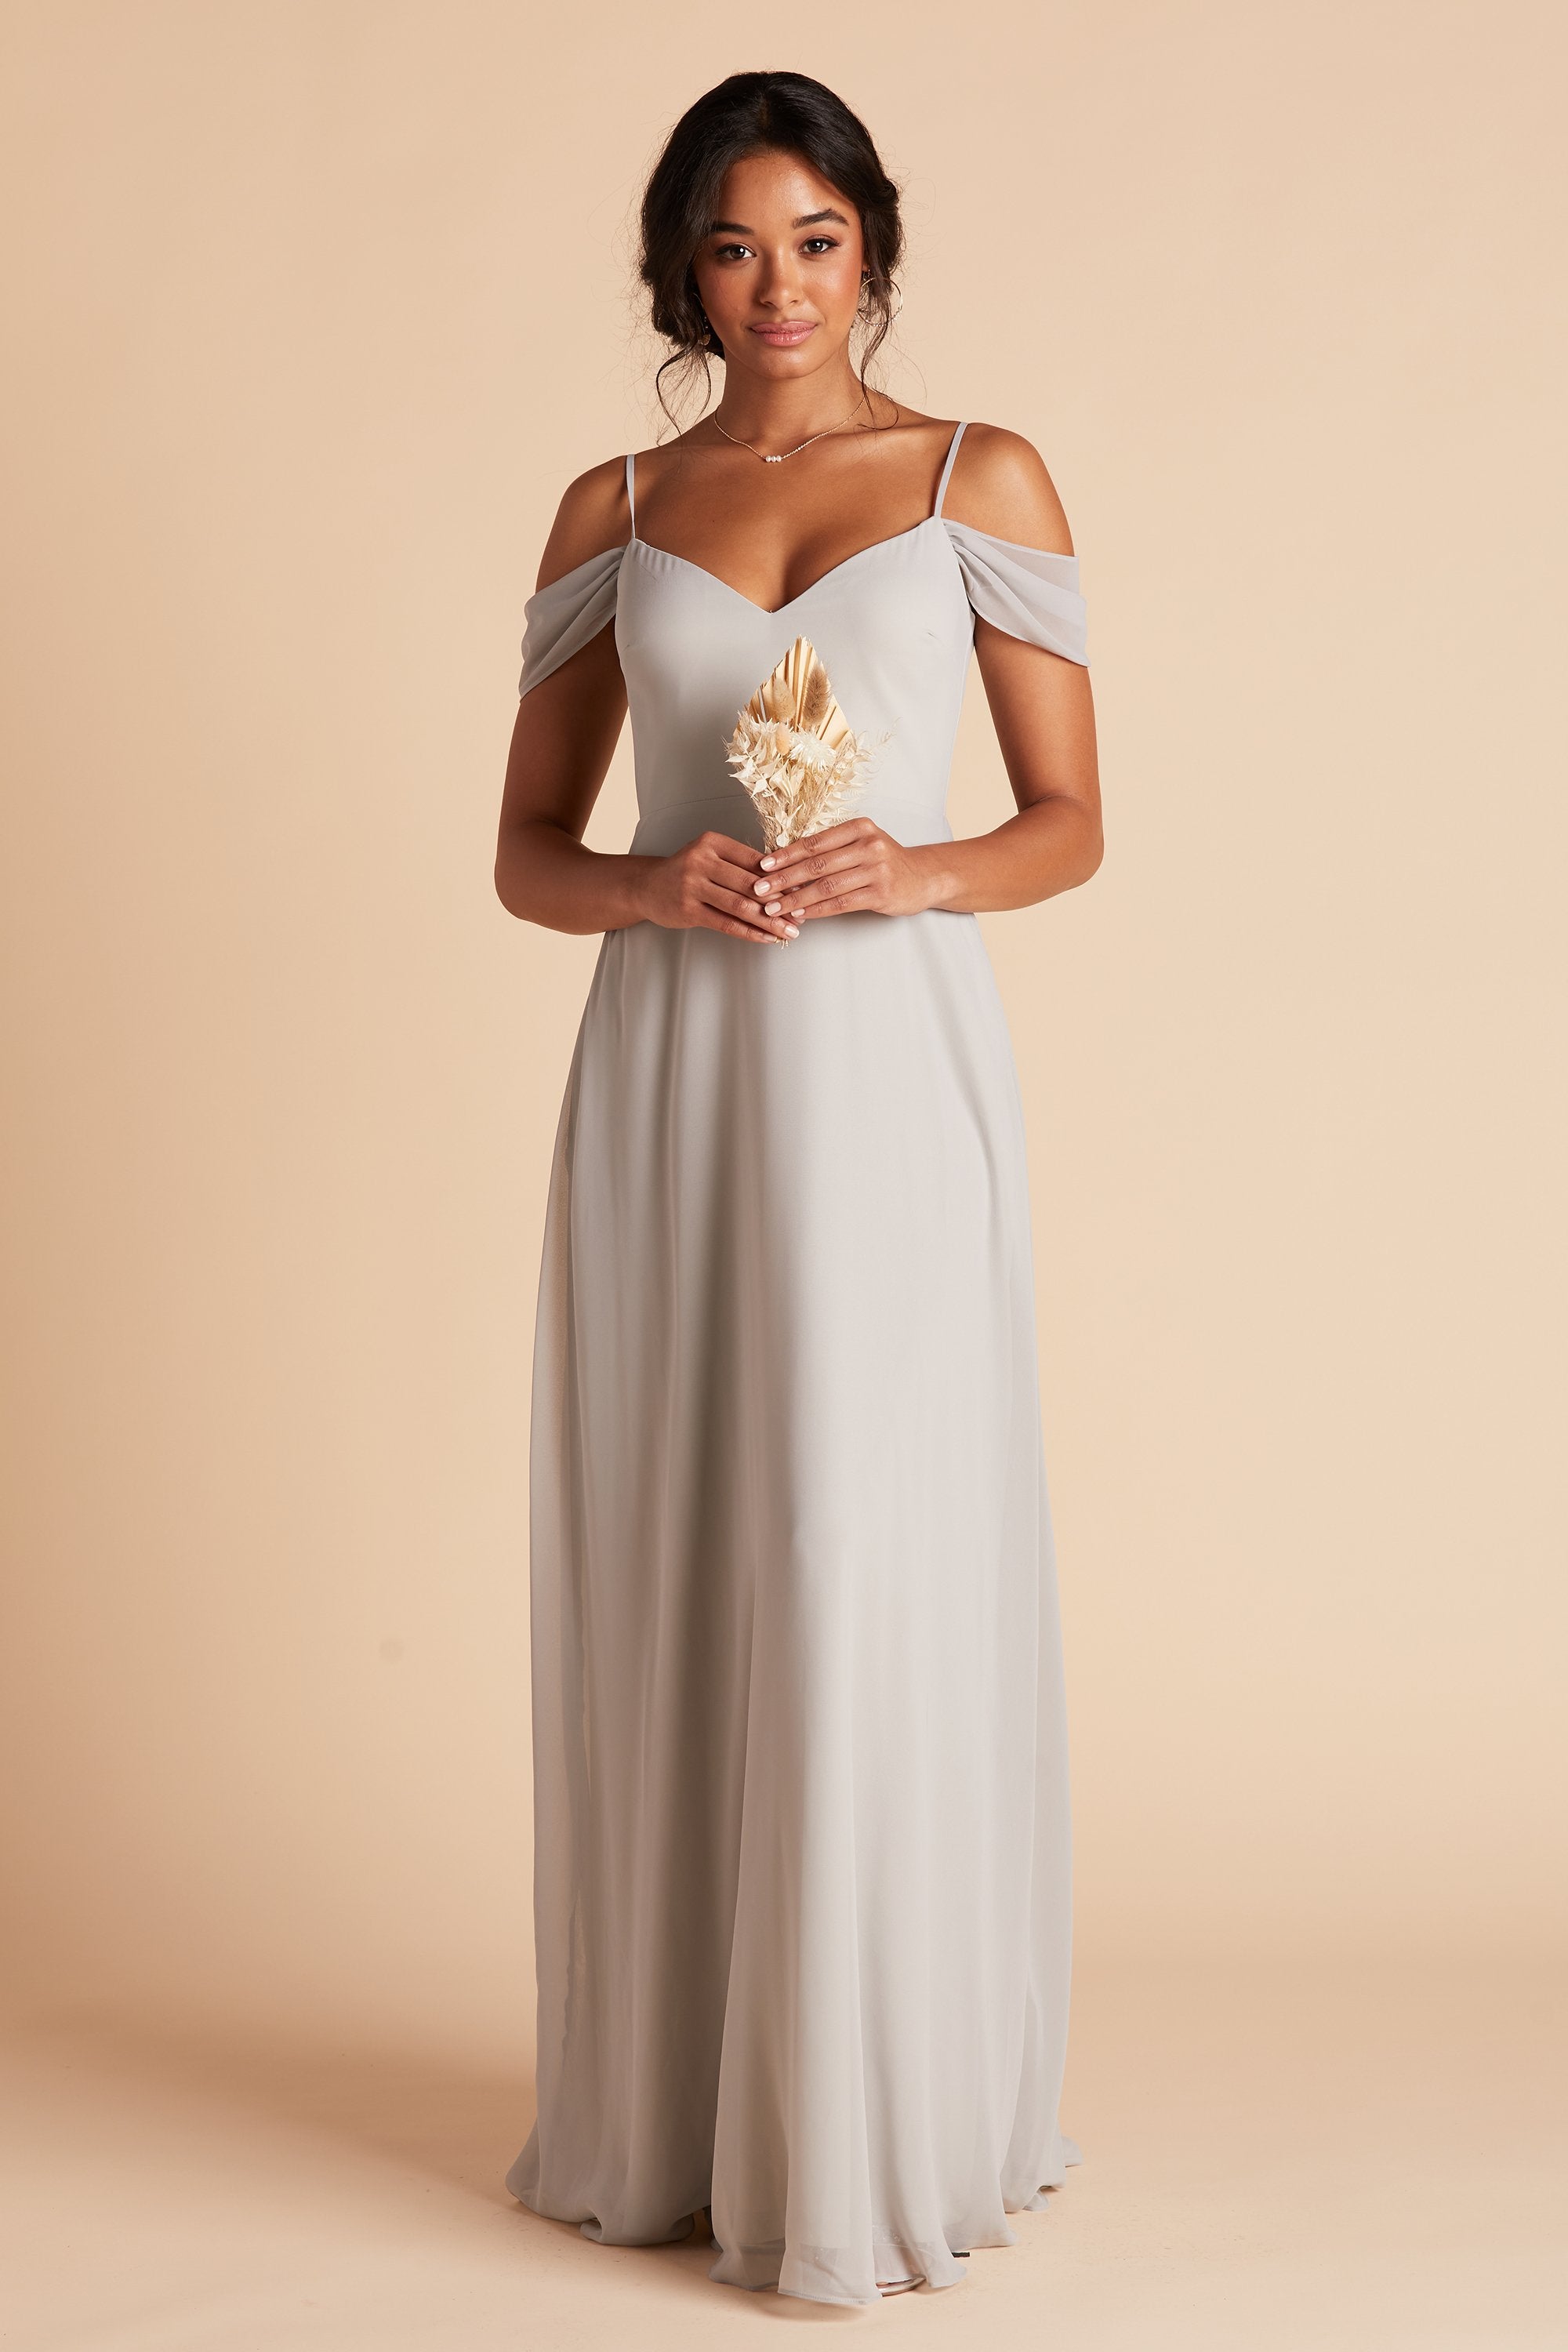 Devin convertible bridesmaid dress  in dove gray chiffon by Birdy Grey, front view